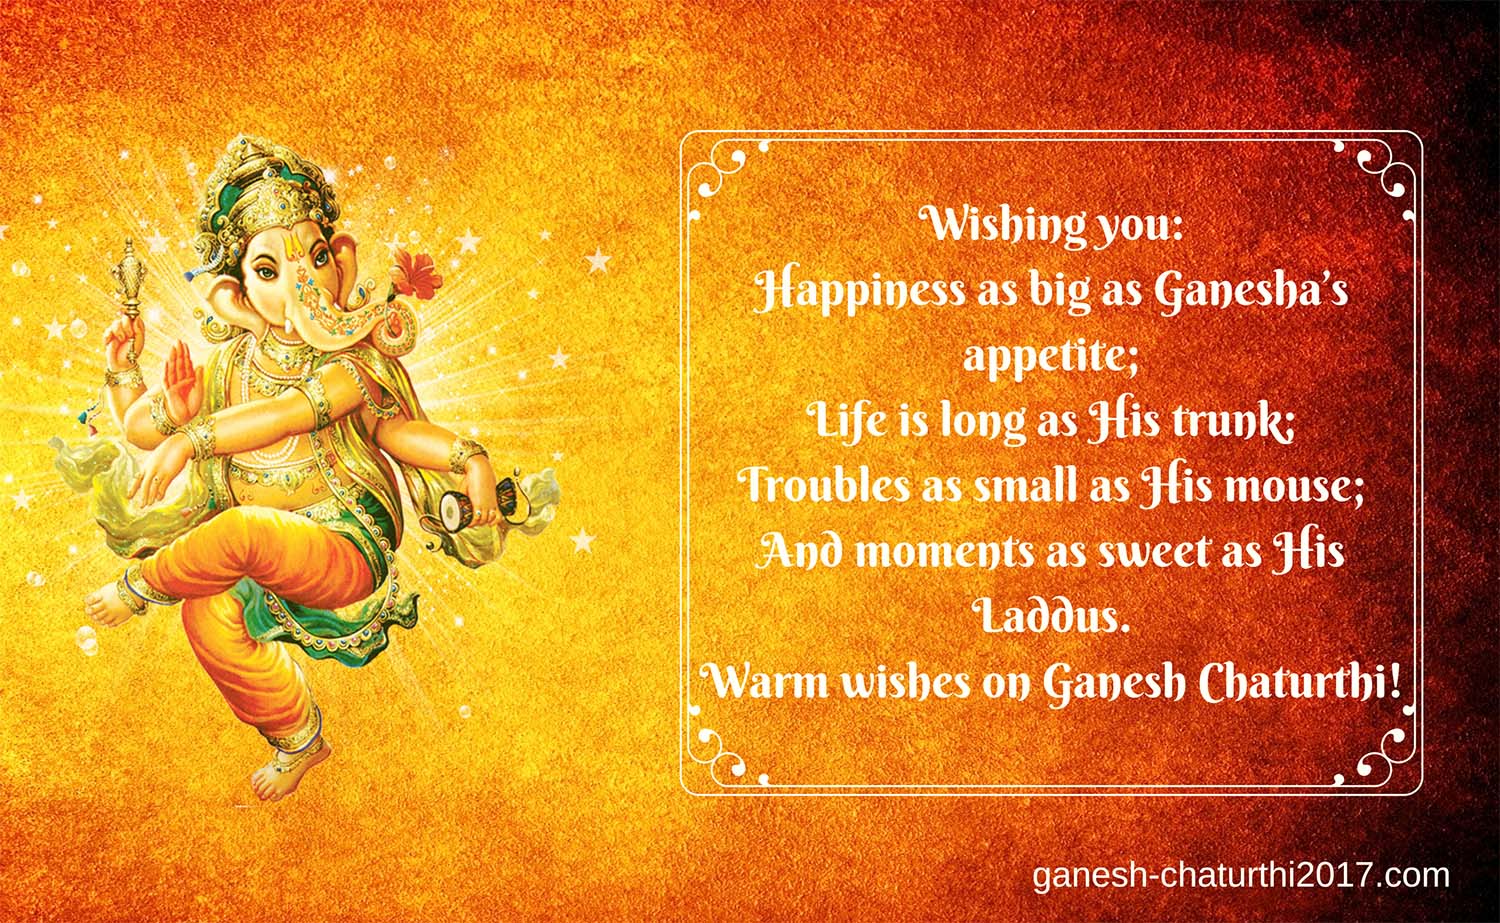 Ganesh Chaturthi Wishes messages 